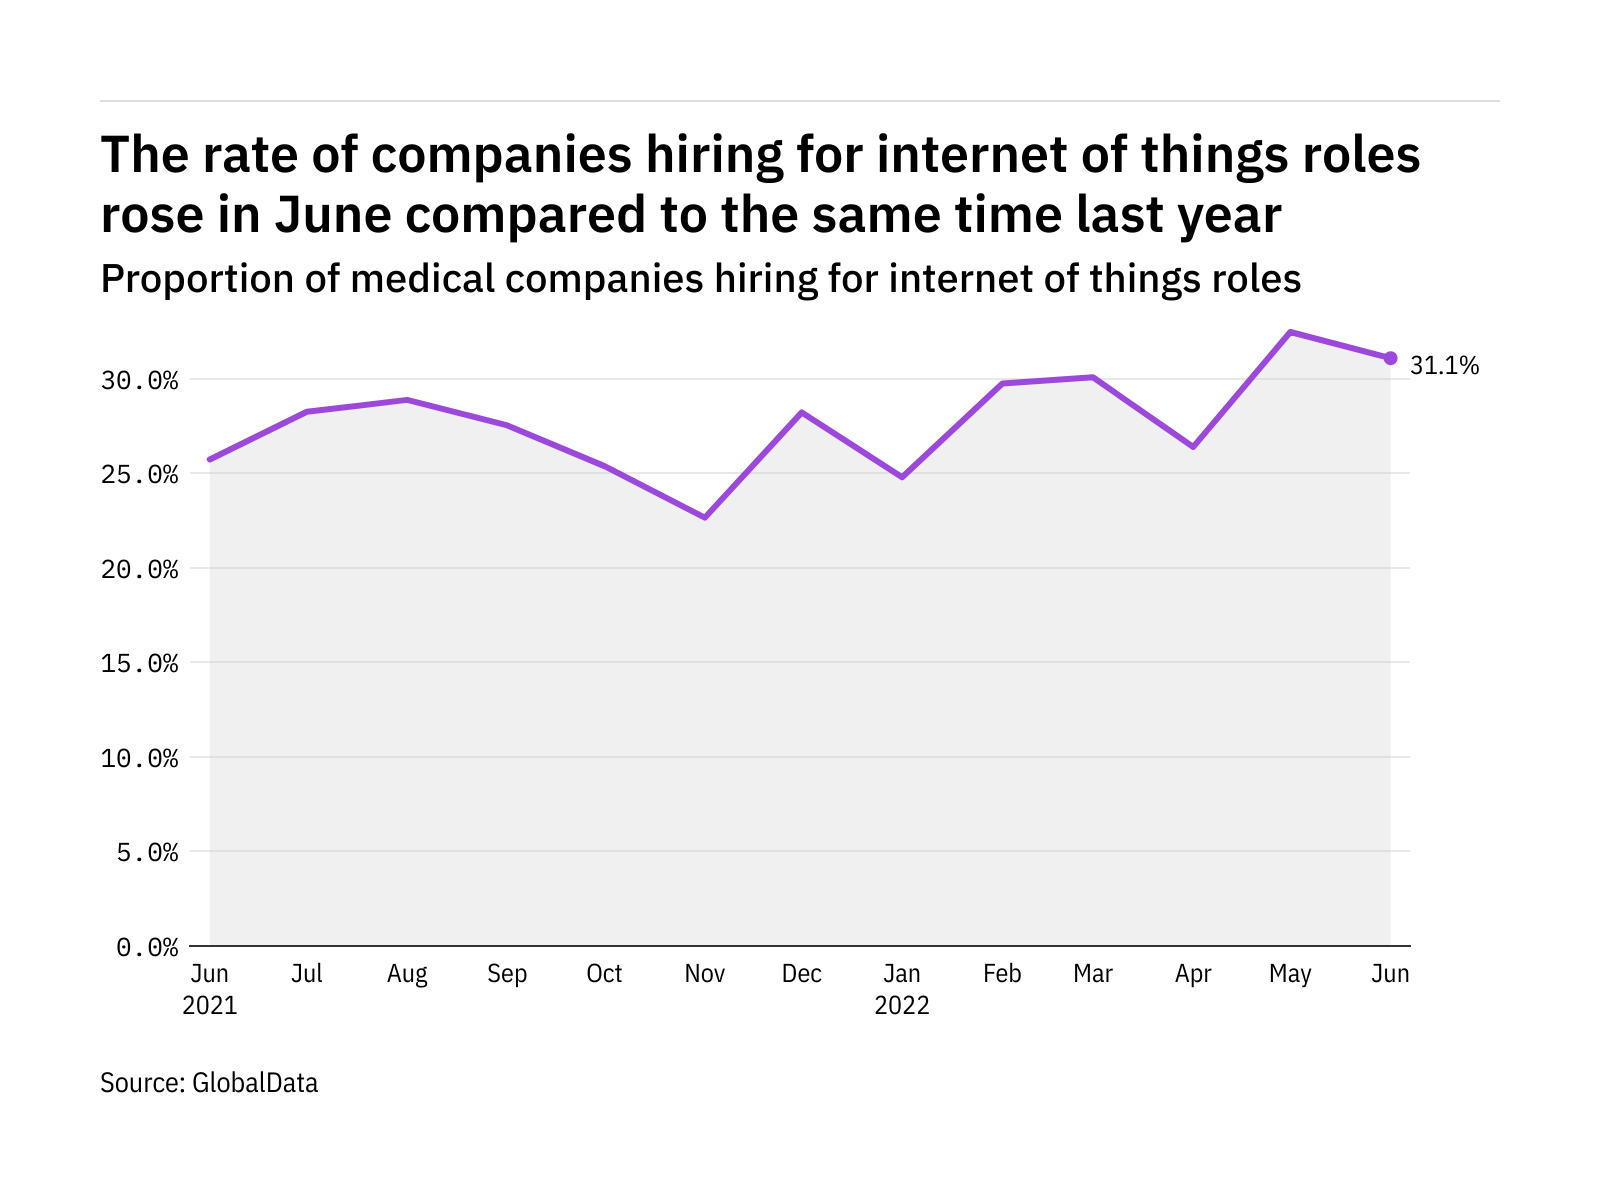 Internet of things hiring levels in the medical industry rose in June 2022